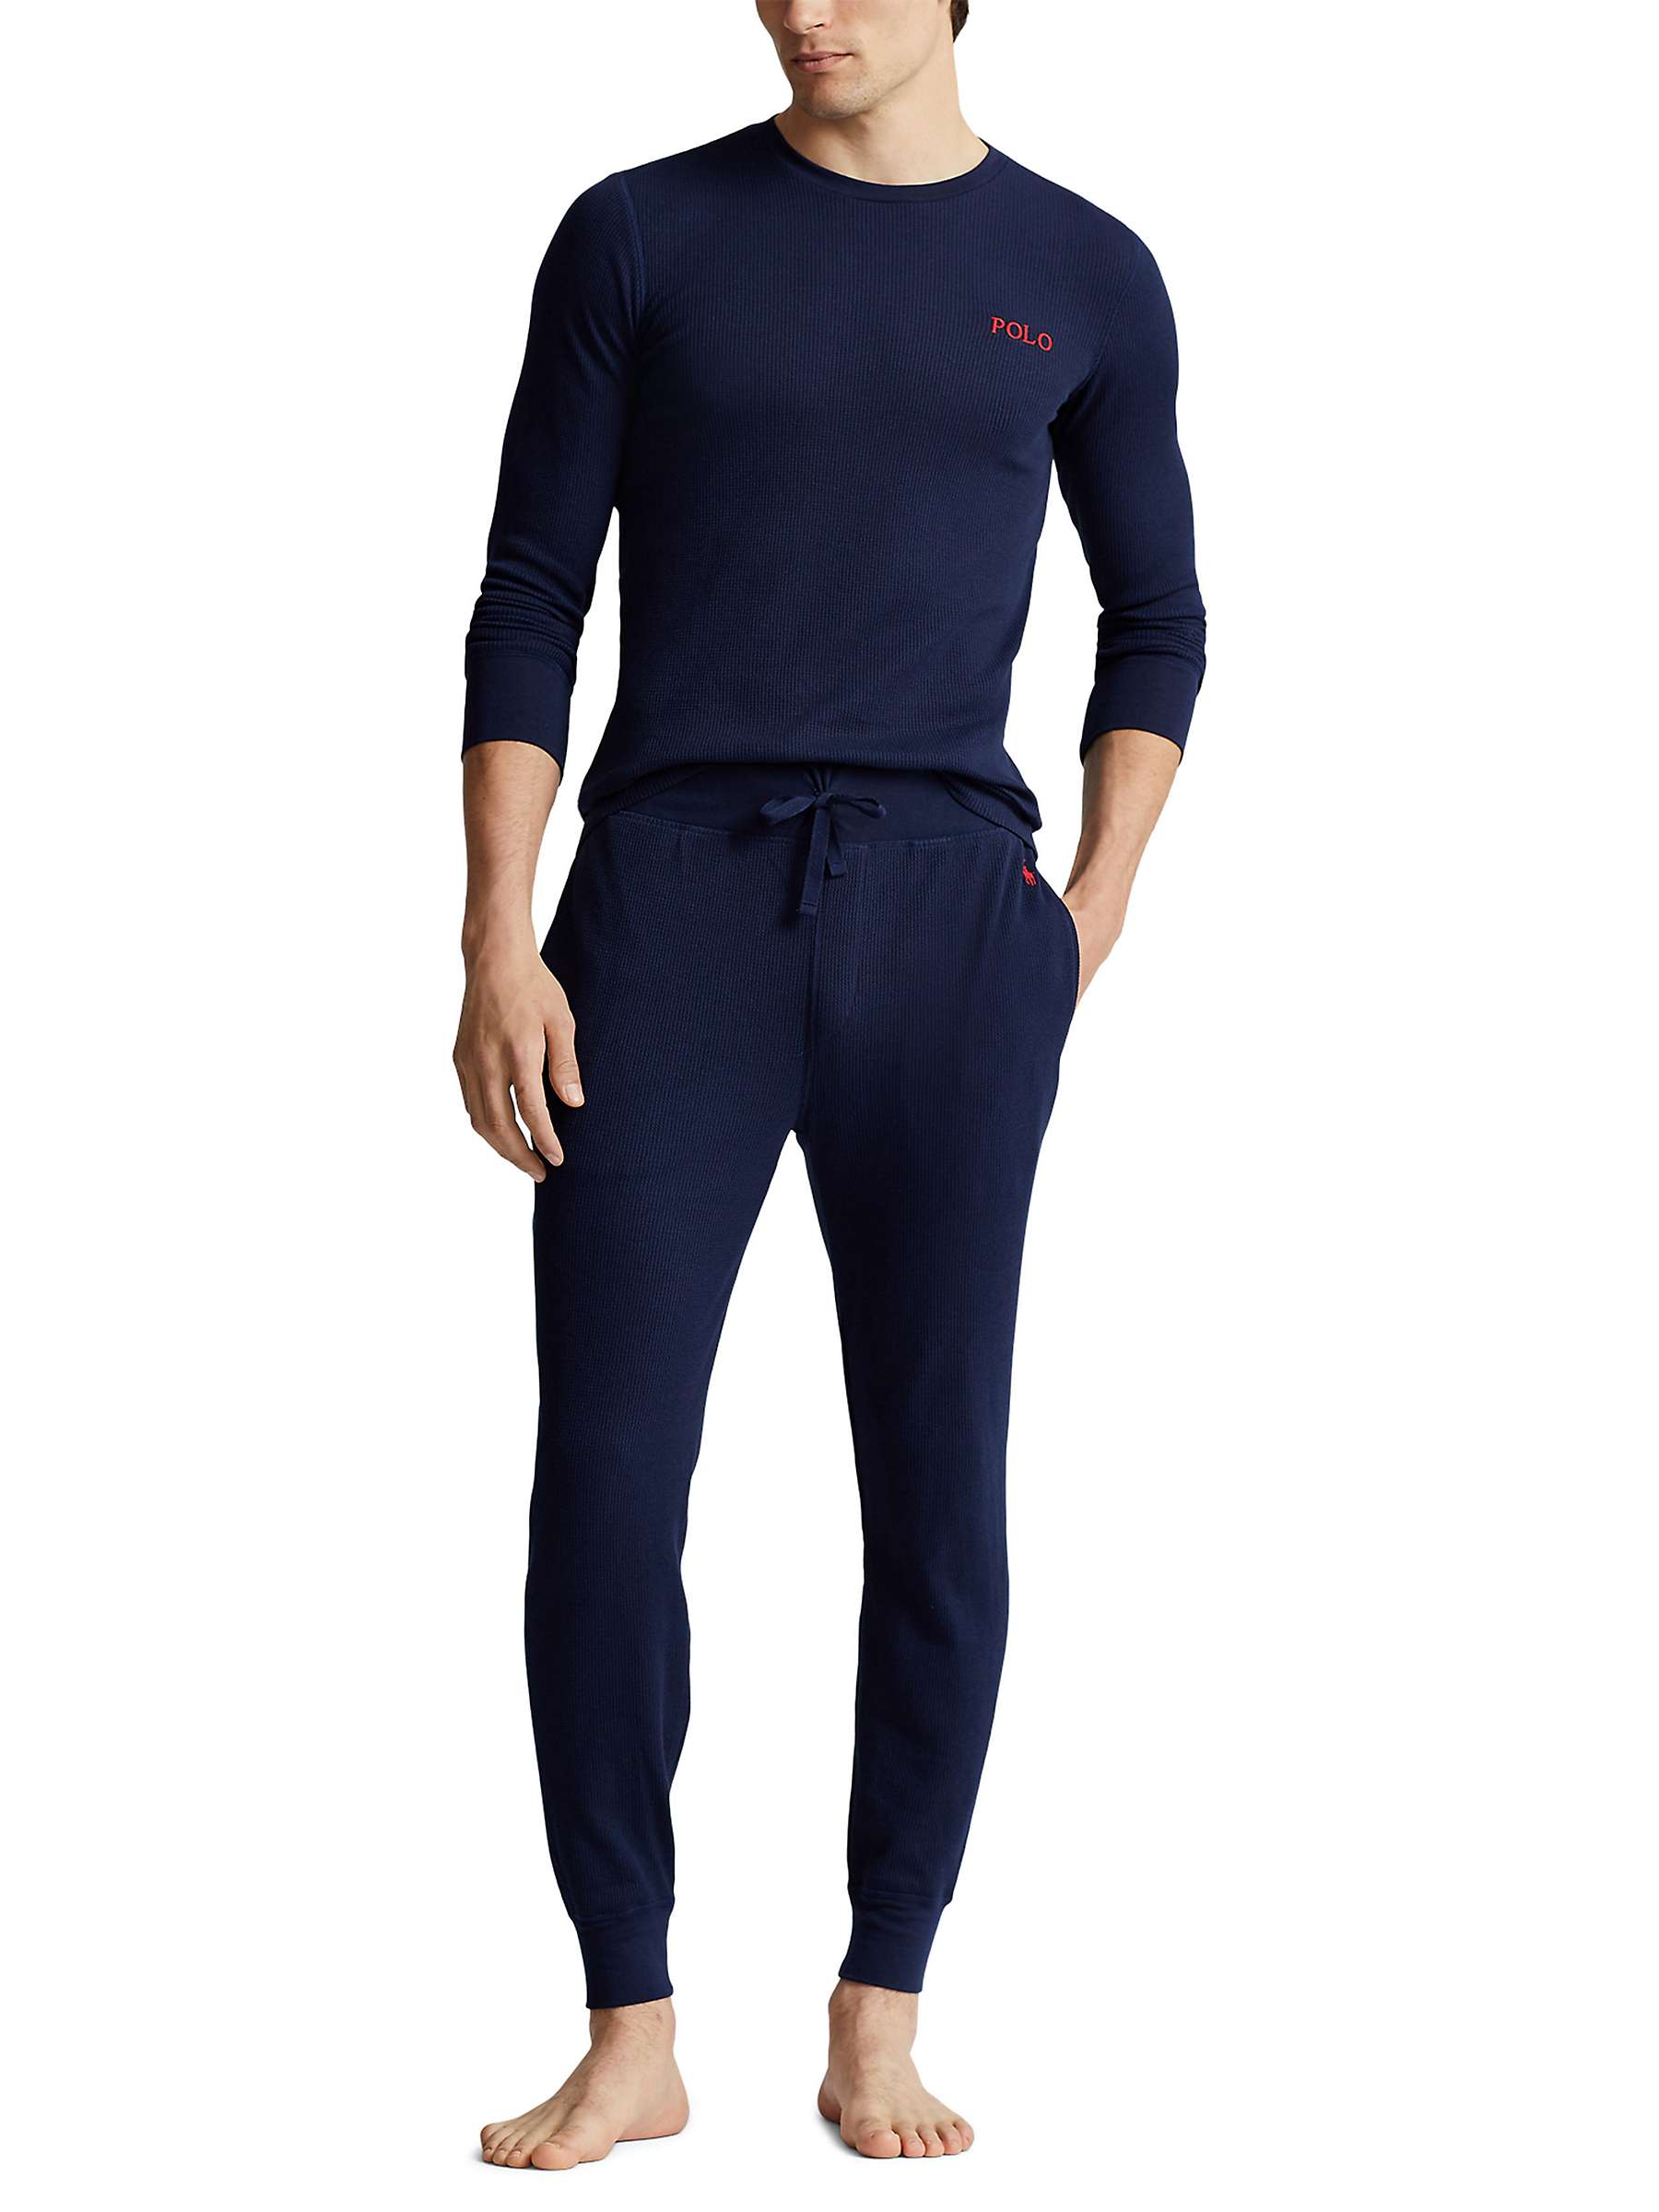 Buy Polo Ralph Lauren Waffle Long Sleeve Lounge Top, Cruise Navy Online at johnlewis.com